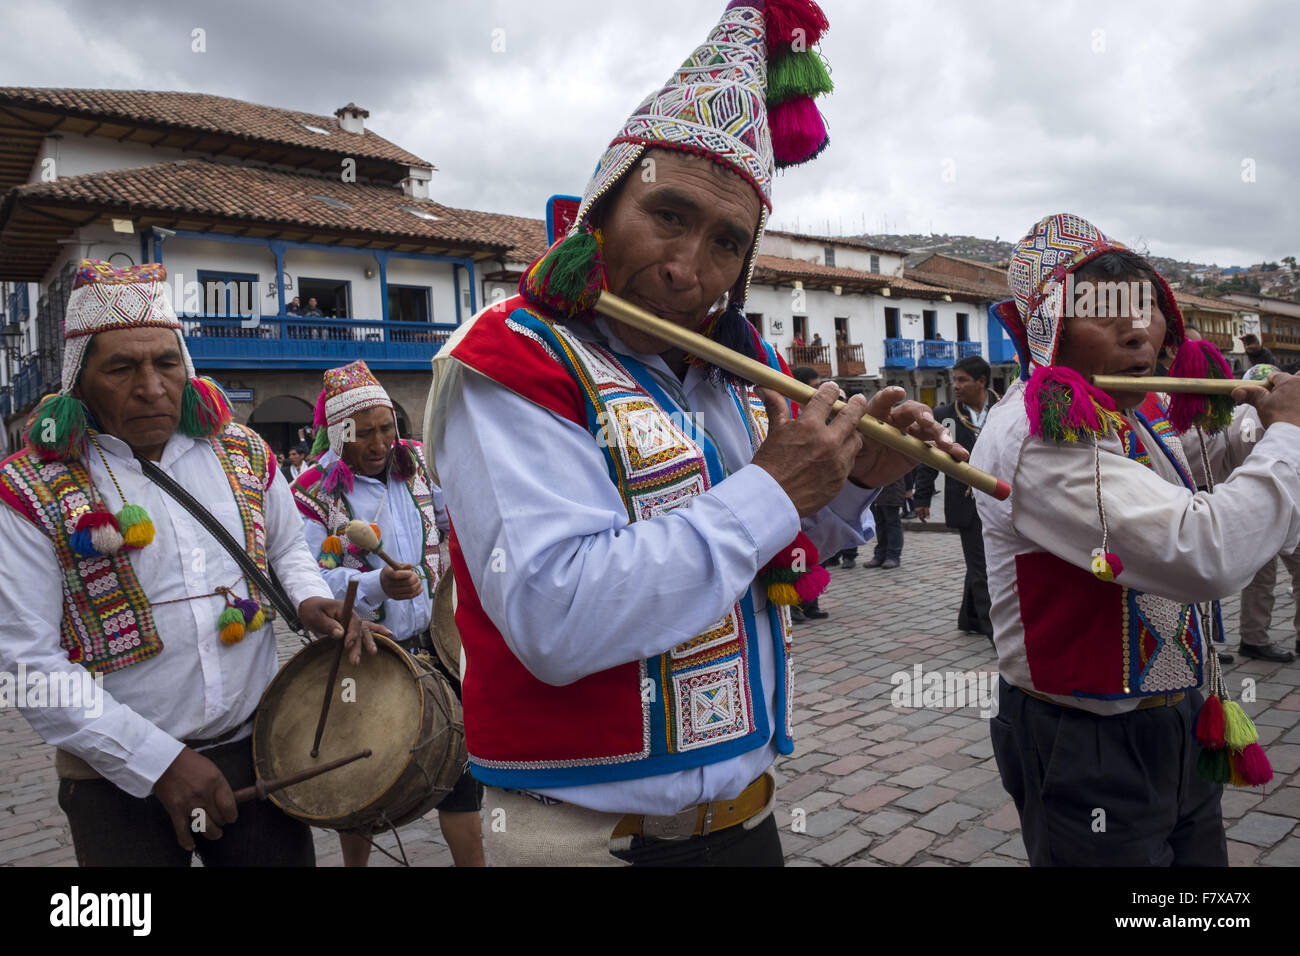 Members of associations participating in the festival of Qoyllur Riti, attend the official launch of the celebration in Cuzco Stock Photo